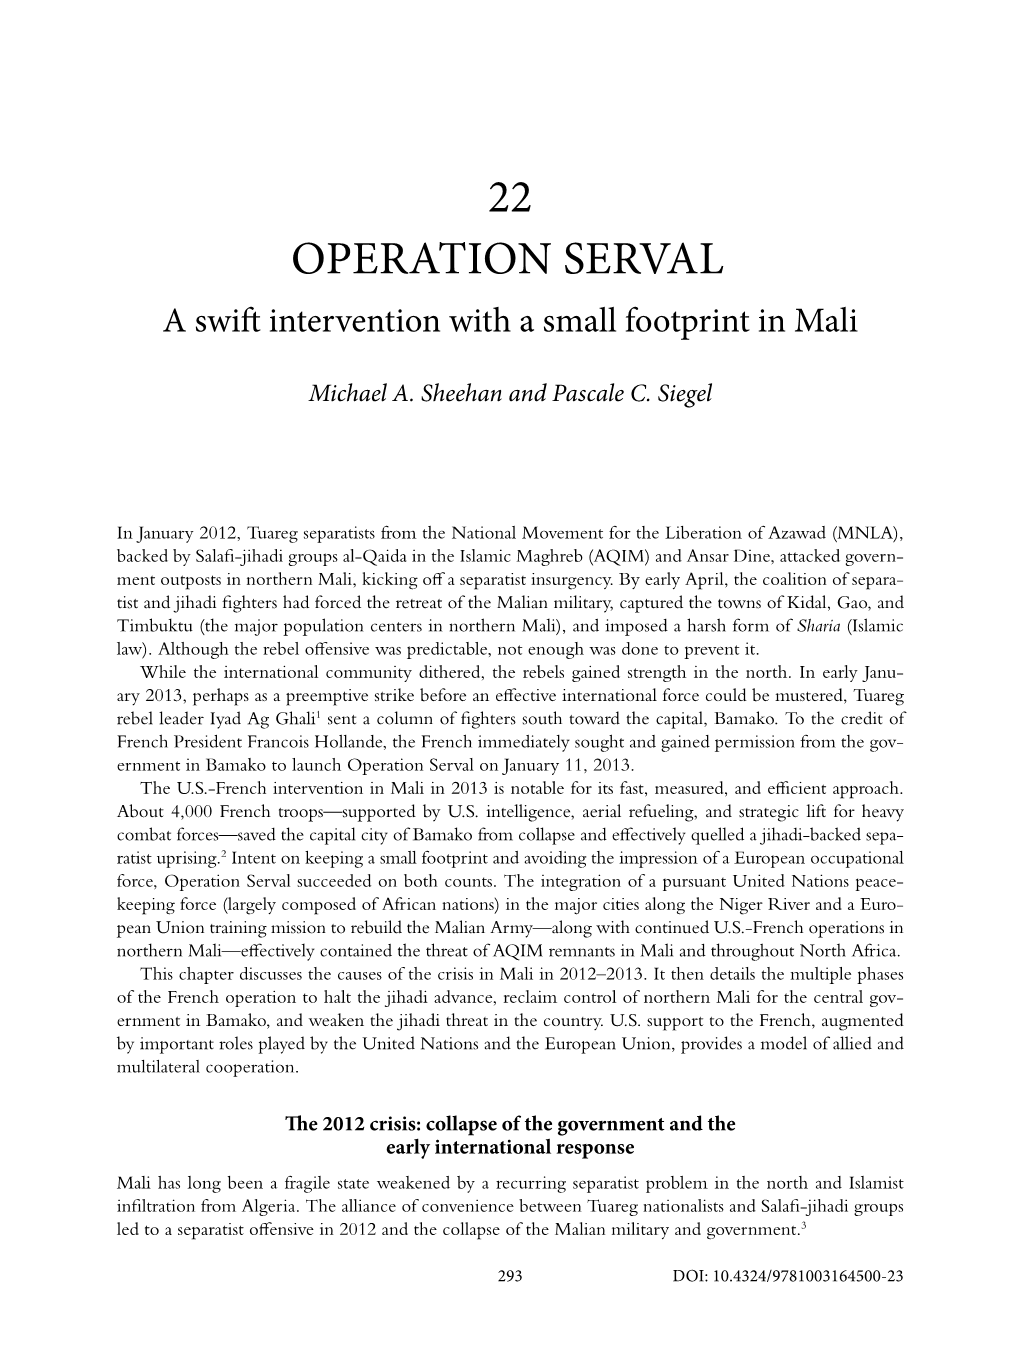 Operation Serval: a Swift Intervention with a Small Footprint in Mali